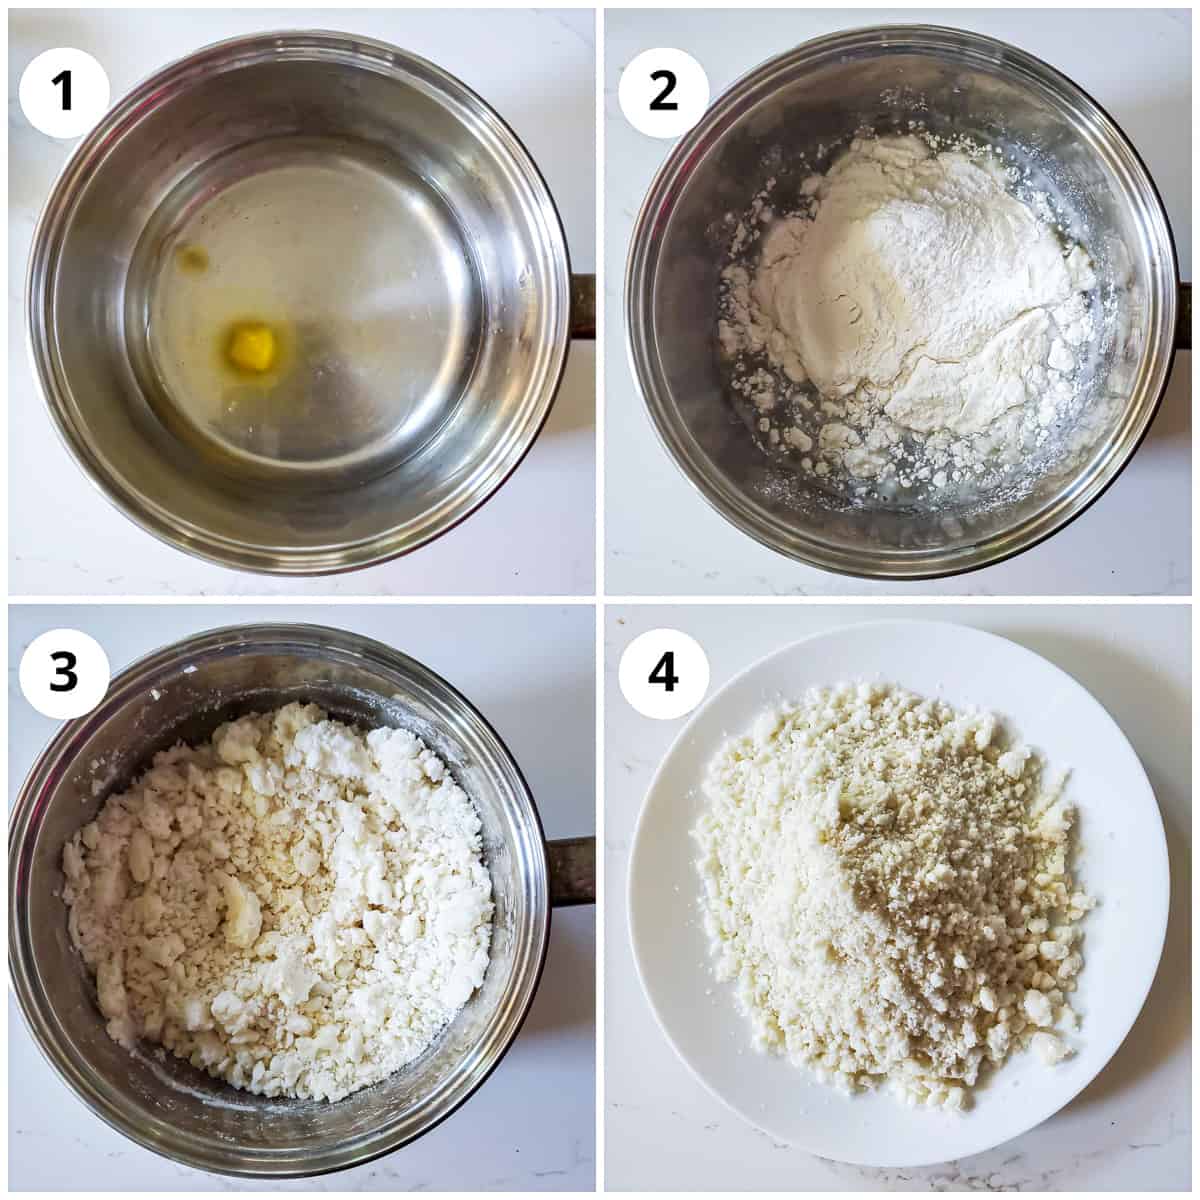 Top view of rice flour mixed in water, salt and ghee. 